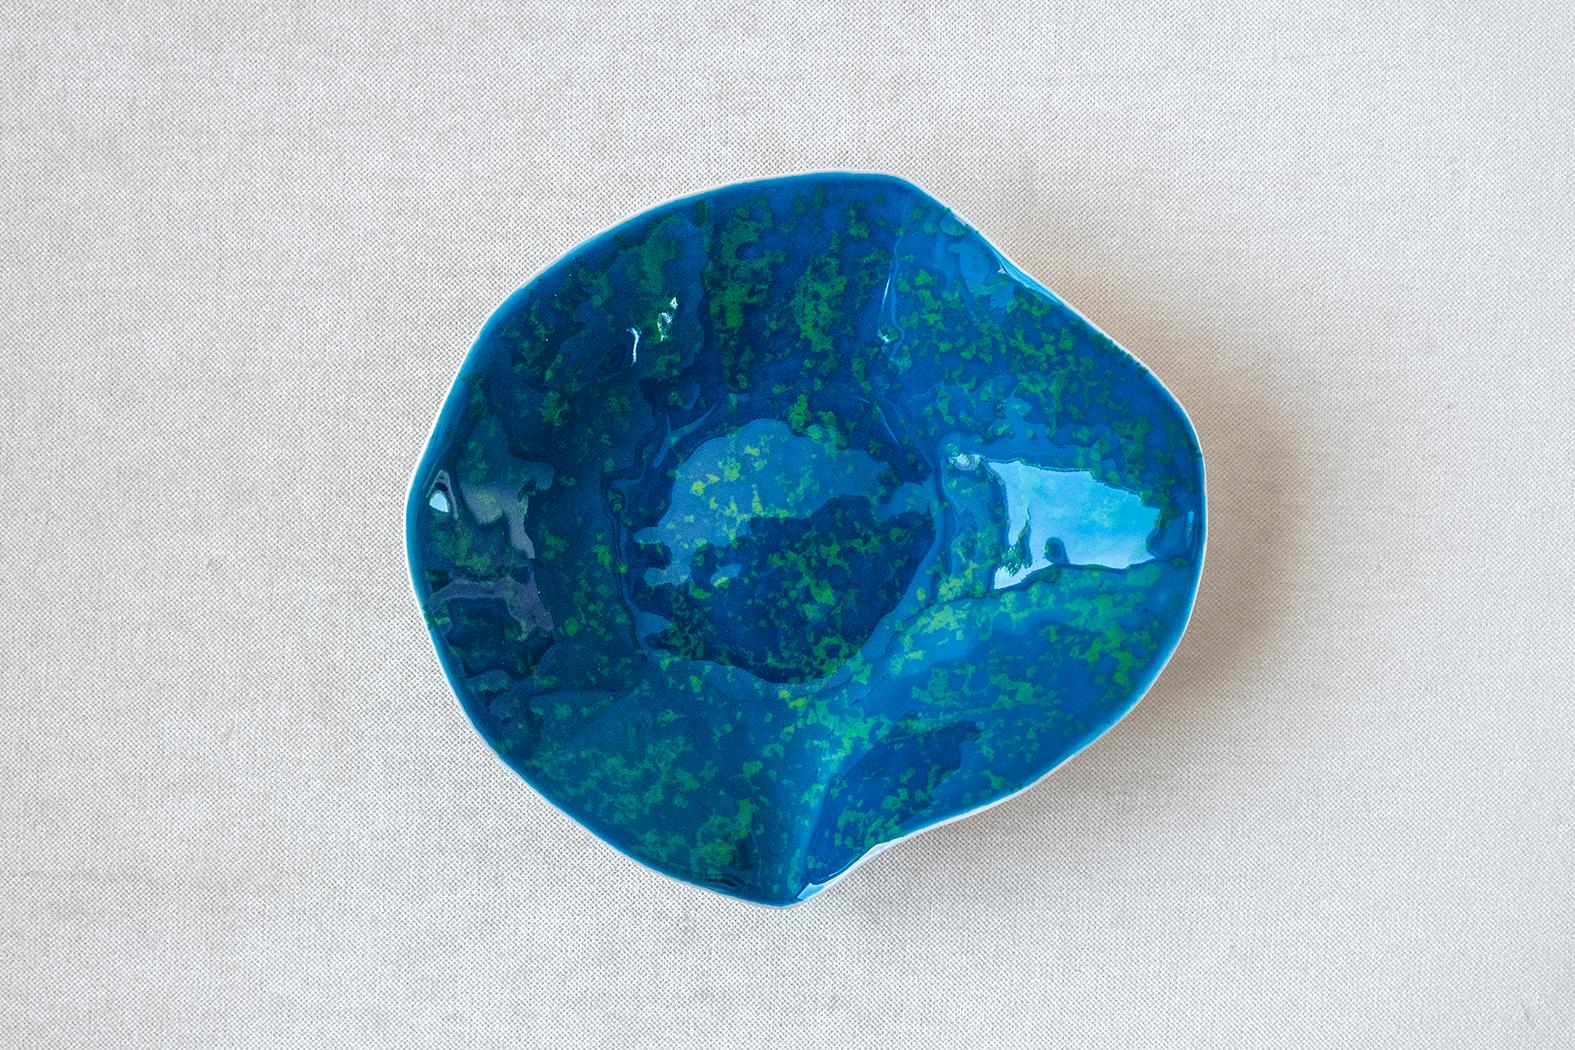 • Small plate
• Measures: 18cm x 17cm x 4cm 
• Perfect for a starter, dessert or side dish
• Hand painted deep blue glaze with green variations
• Unglazed textured bottom
• Designed in Amsterdam / handmade in France
• True Porcelaine de